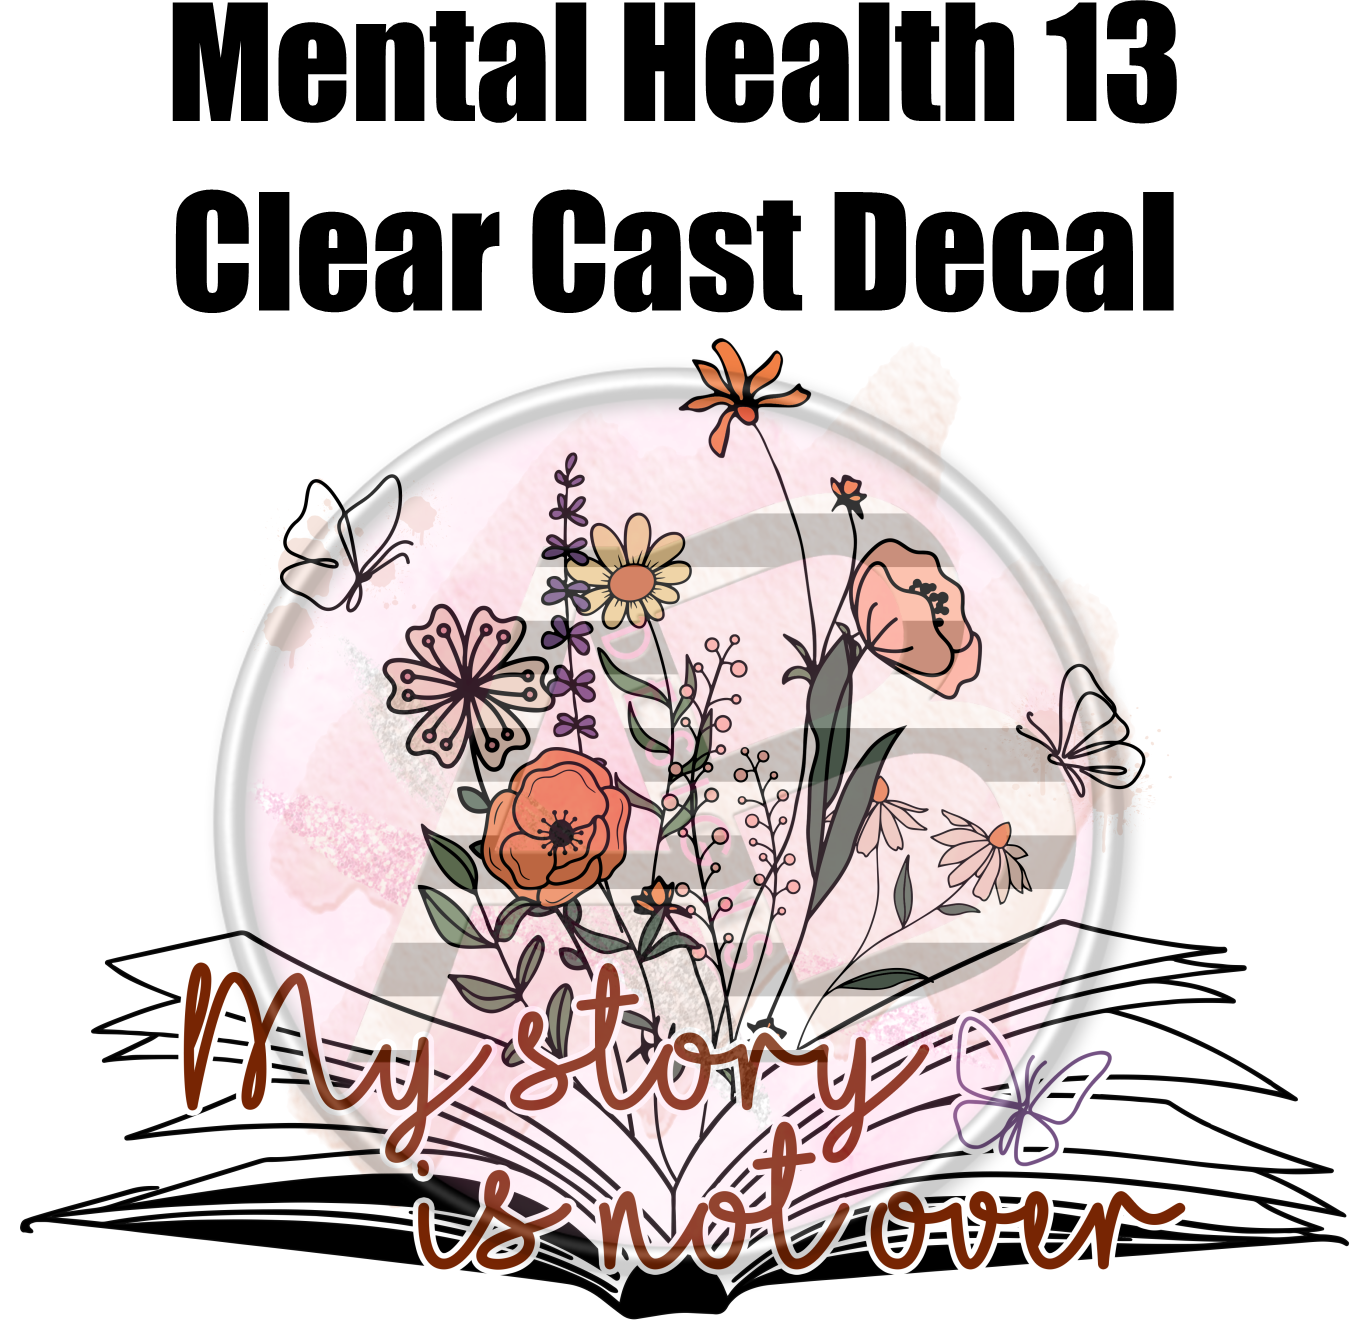 Mental Health 13 - Clear Cast Decal